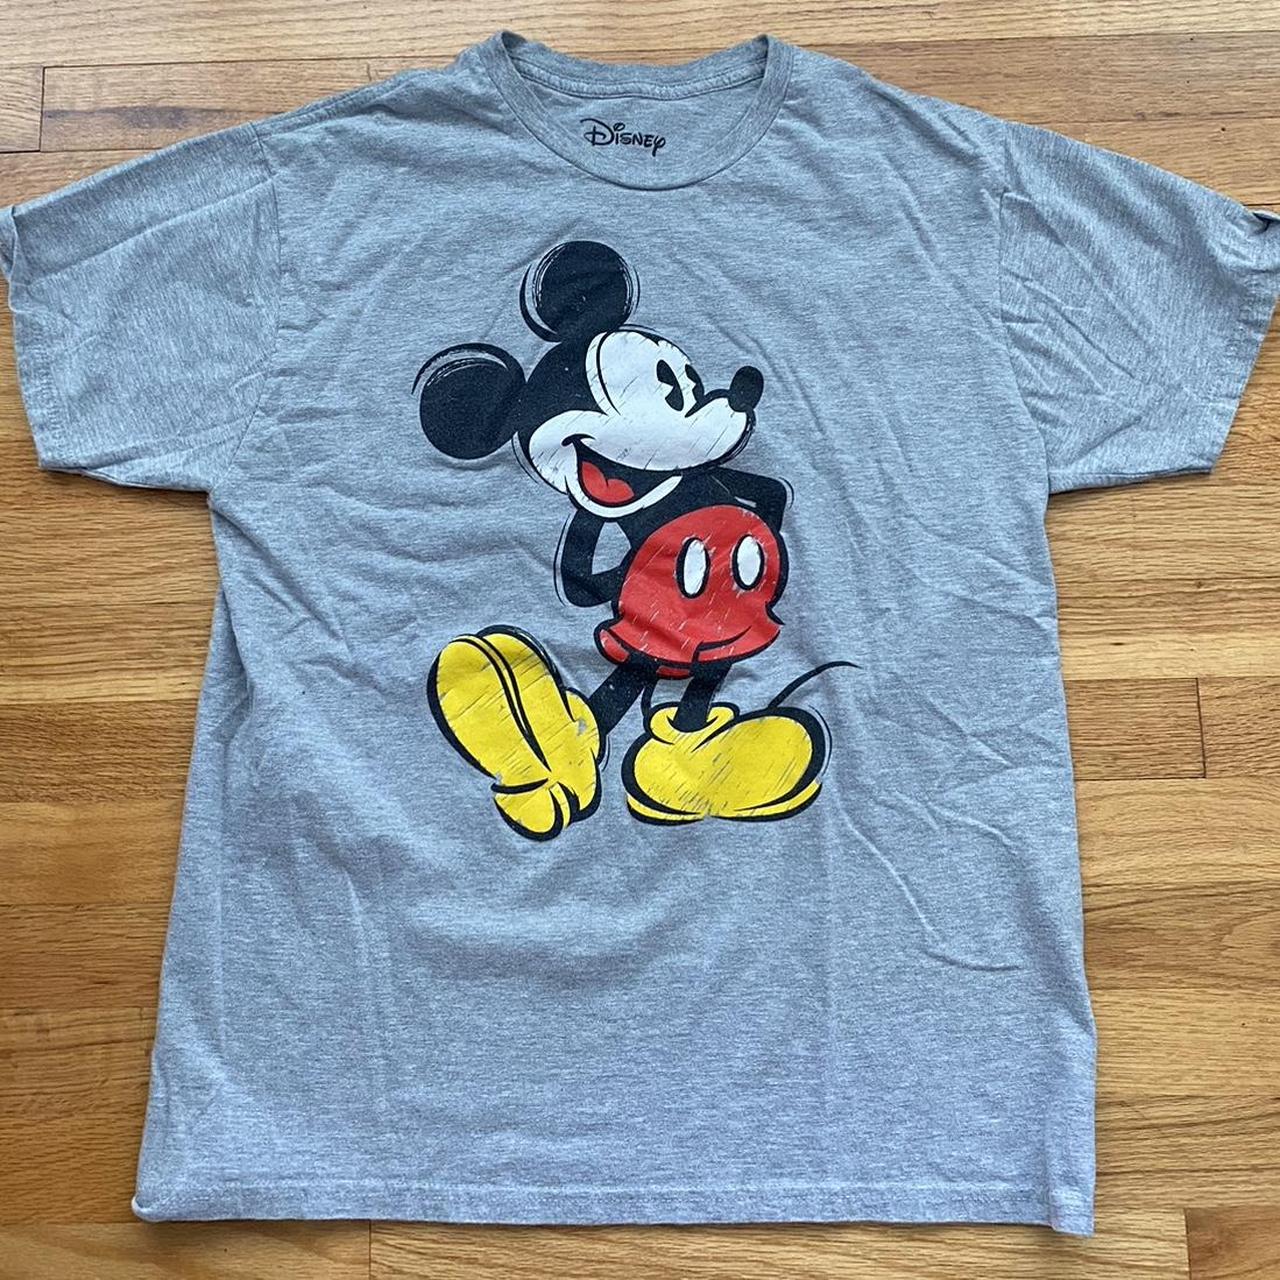 Mickey Mouse/ Disney tshirt Size large #mickeymouse... - Depop